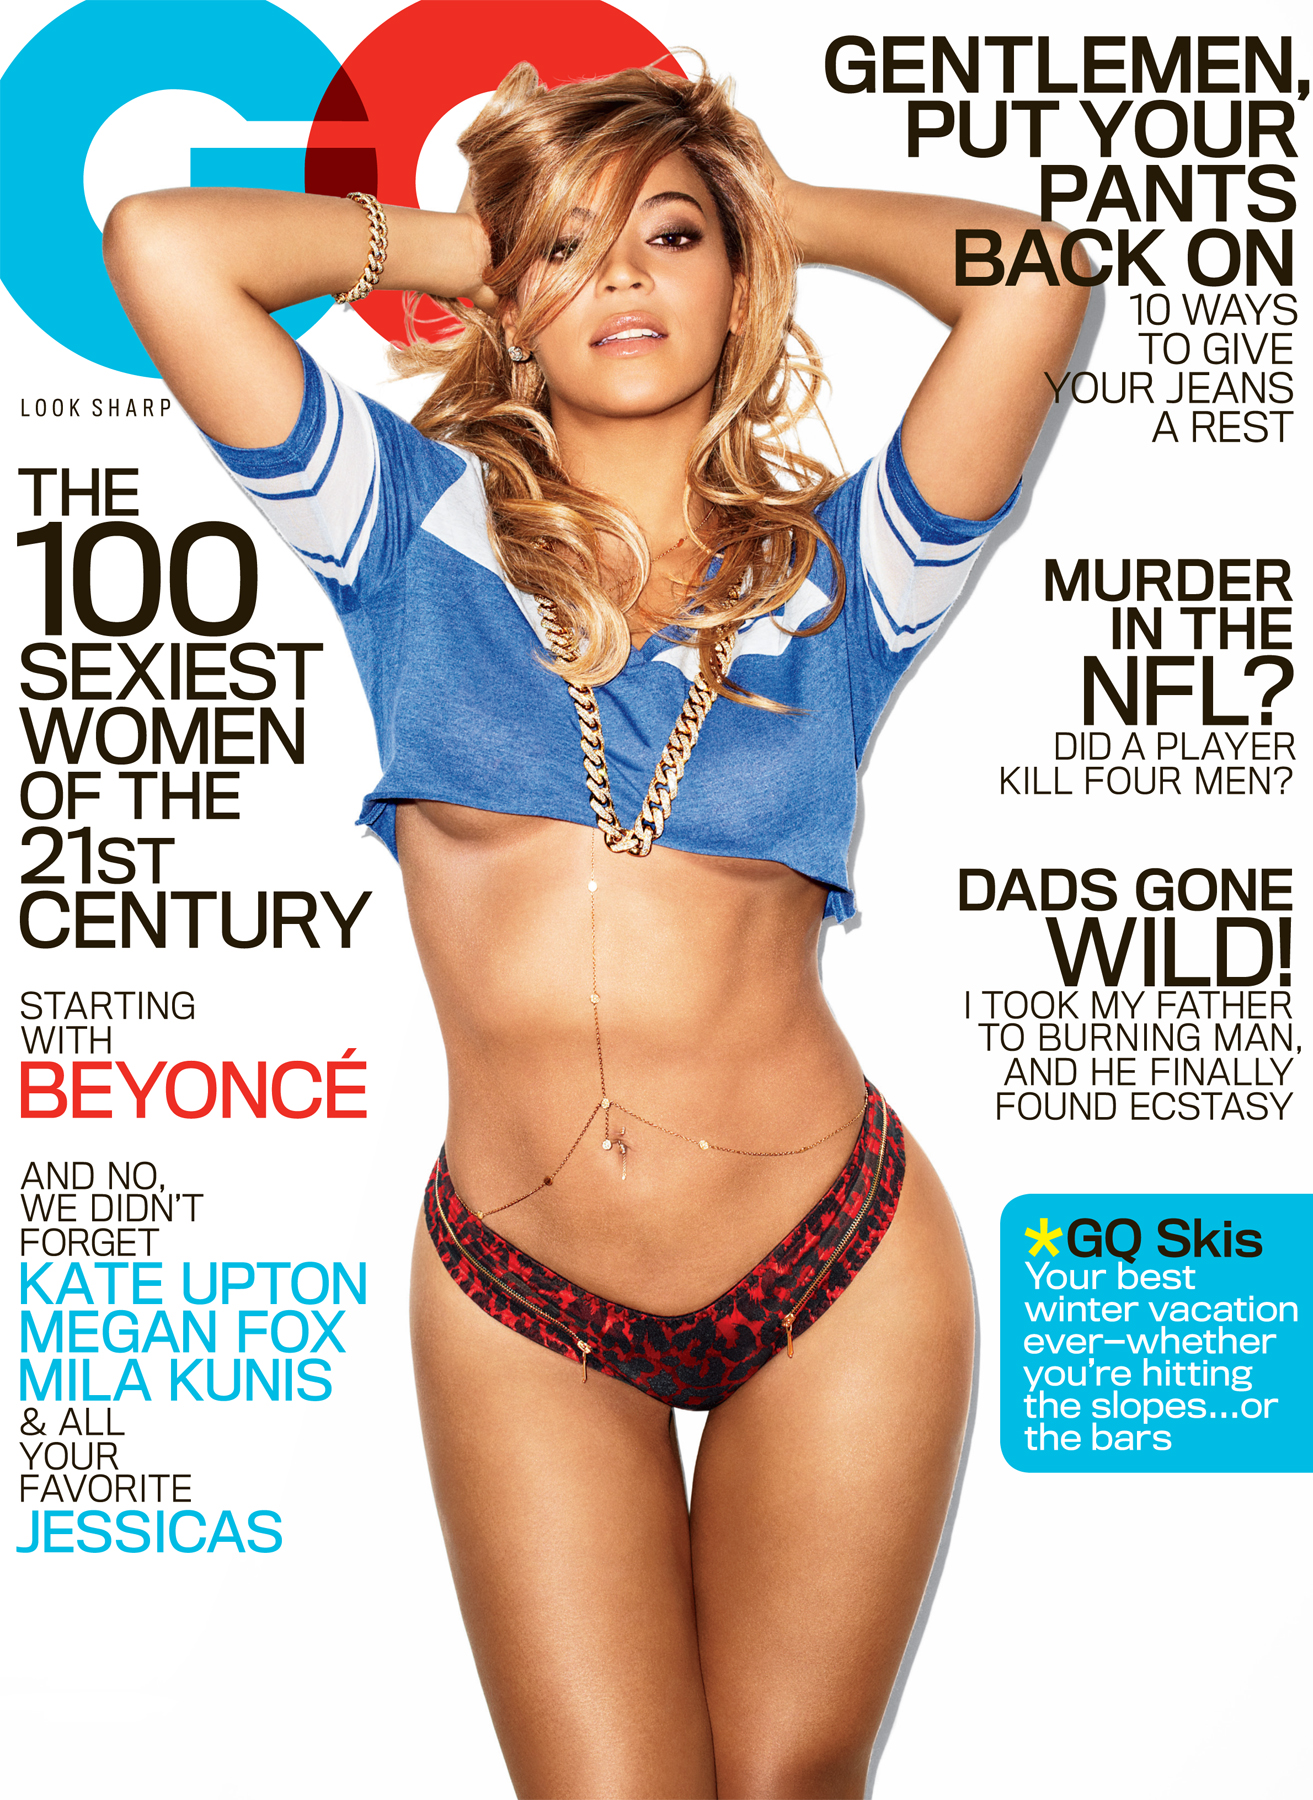 beyonce gq 2013 thatgrapejuice Beyonce Covers GQs 100 Sexiest Women Of The 21st Century